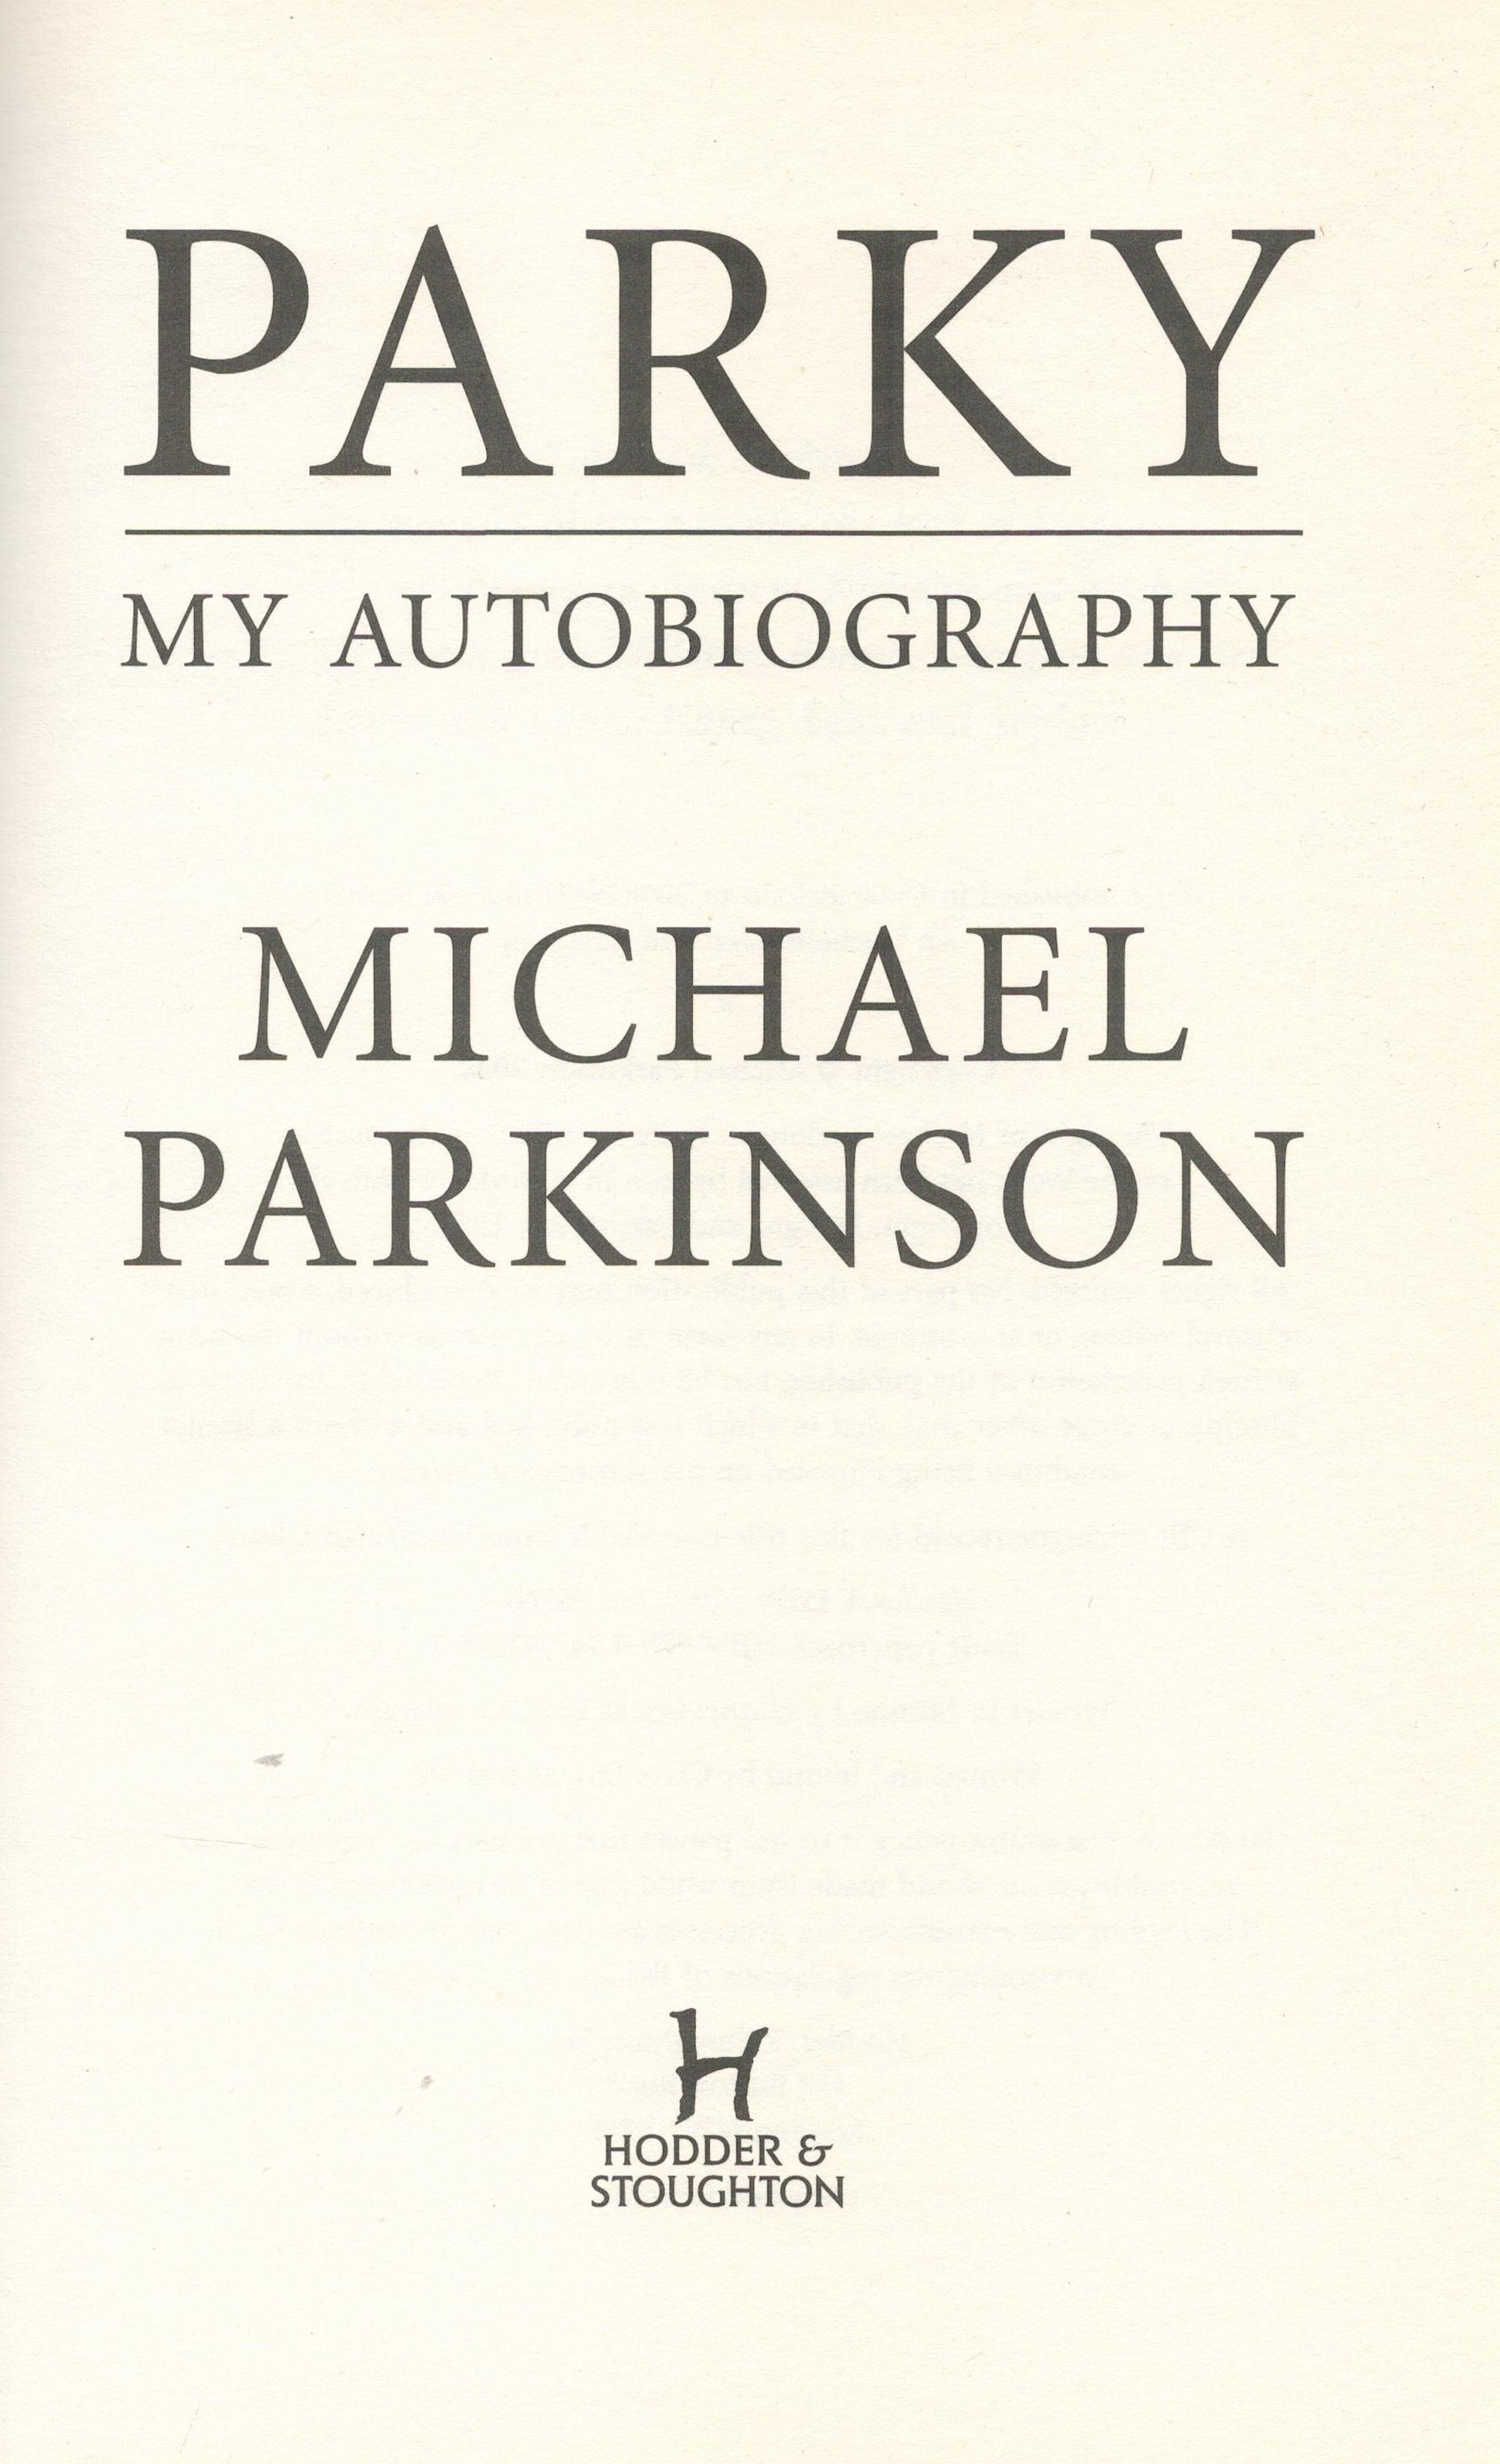 Michael Parkinson Parky My Autobiography Hardback Book 2008 First Edition published by Hodder and - Image 3 of 6